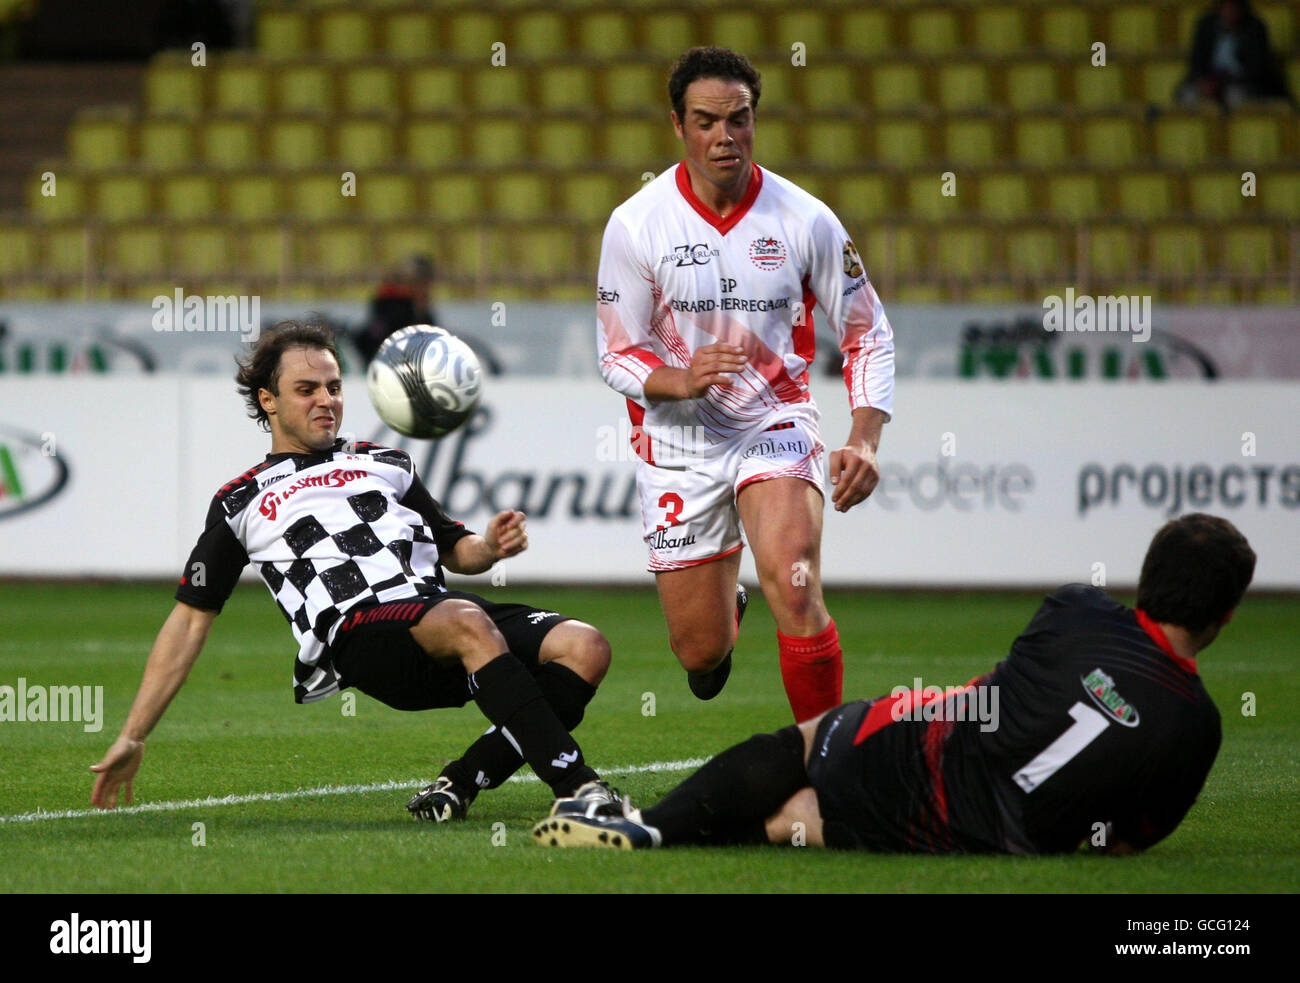 Soccer - Charity Match - Celebrity v Formula One Drivers - Stade Louis II. Felipe Massa (left) in action during the Celebrity Charity Football match at Stade Louis II, Monaco. Stock Photo